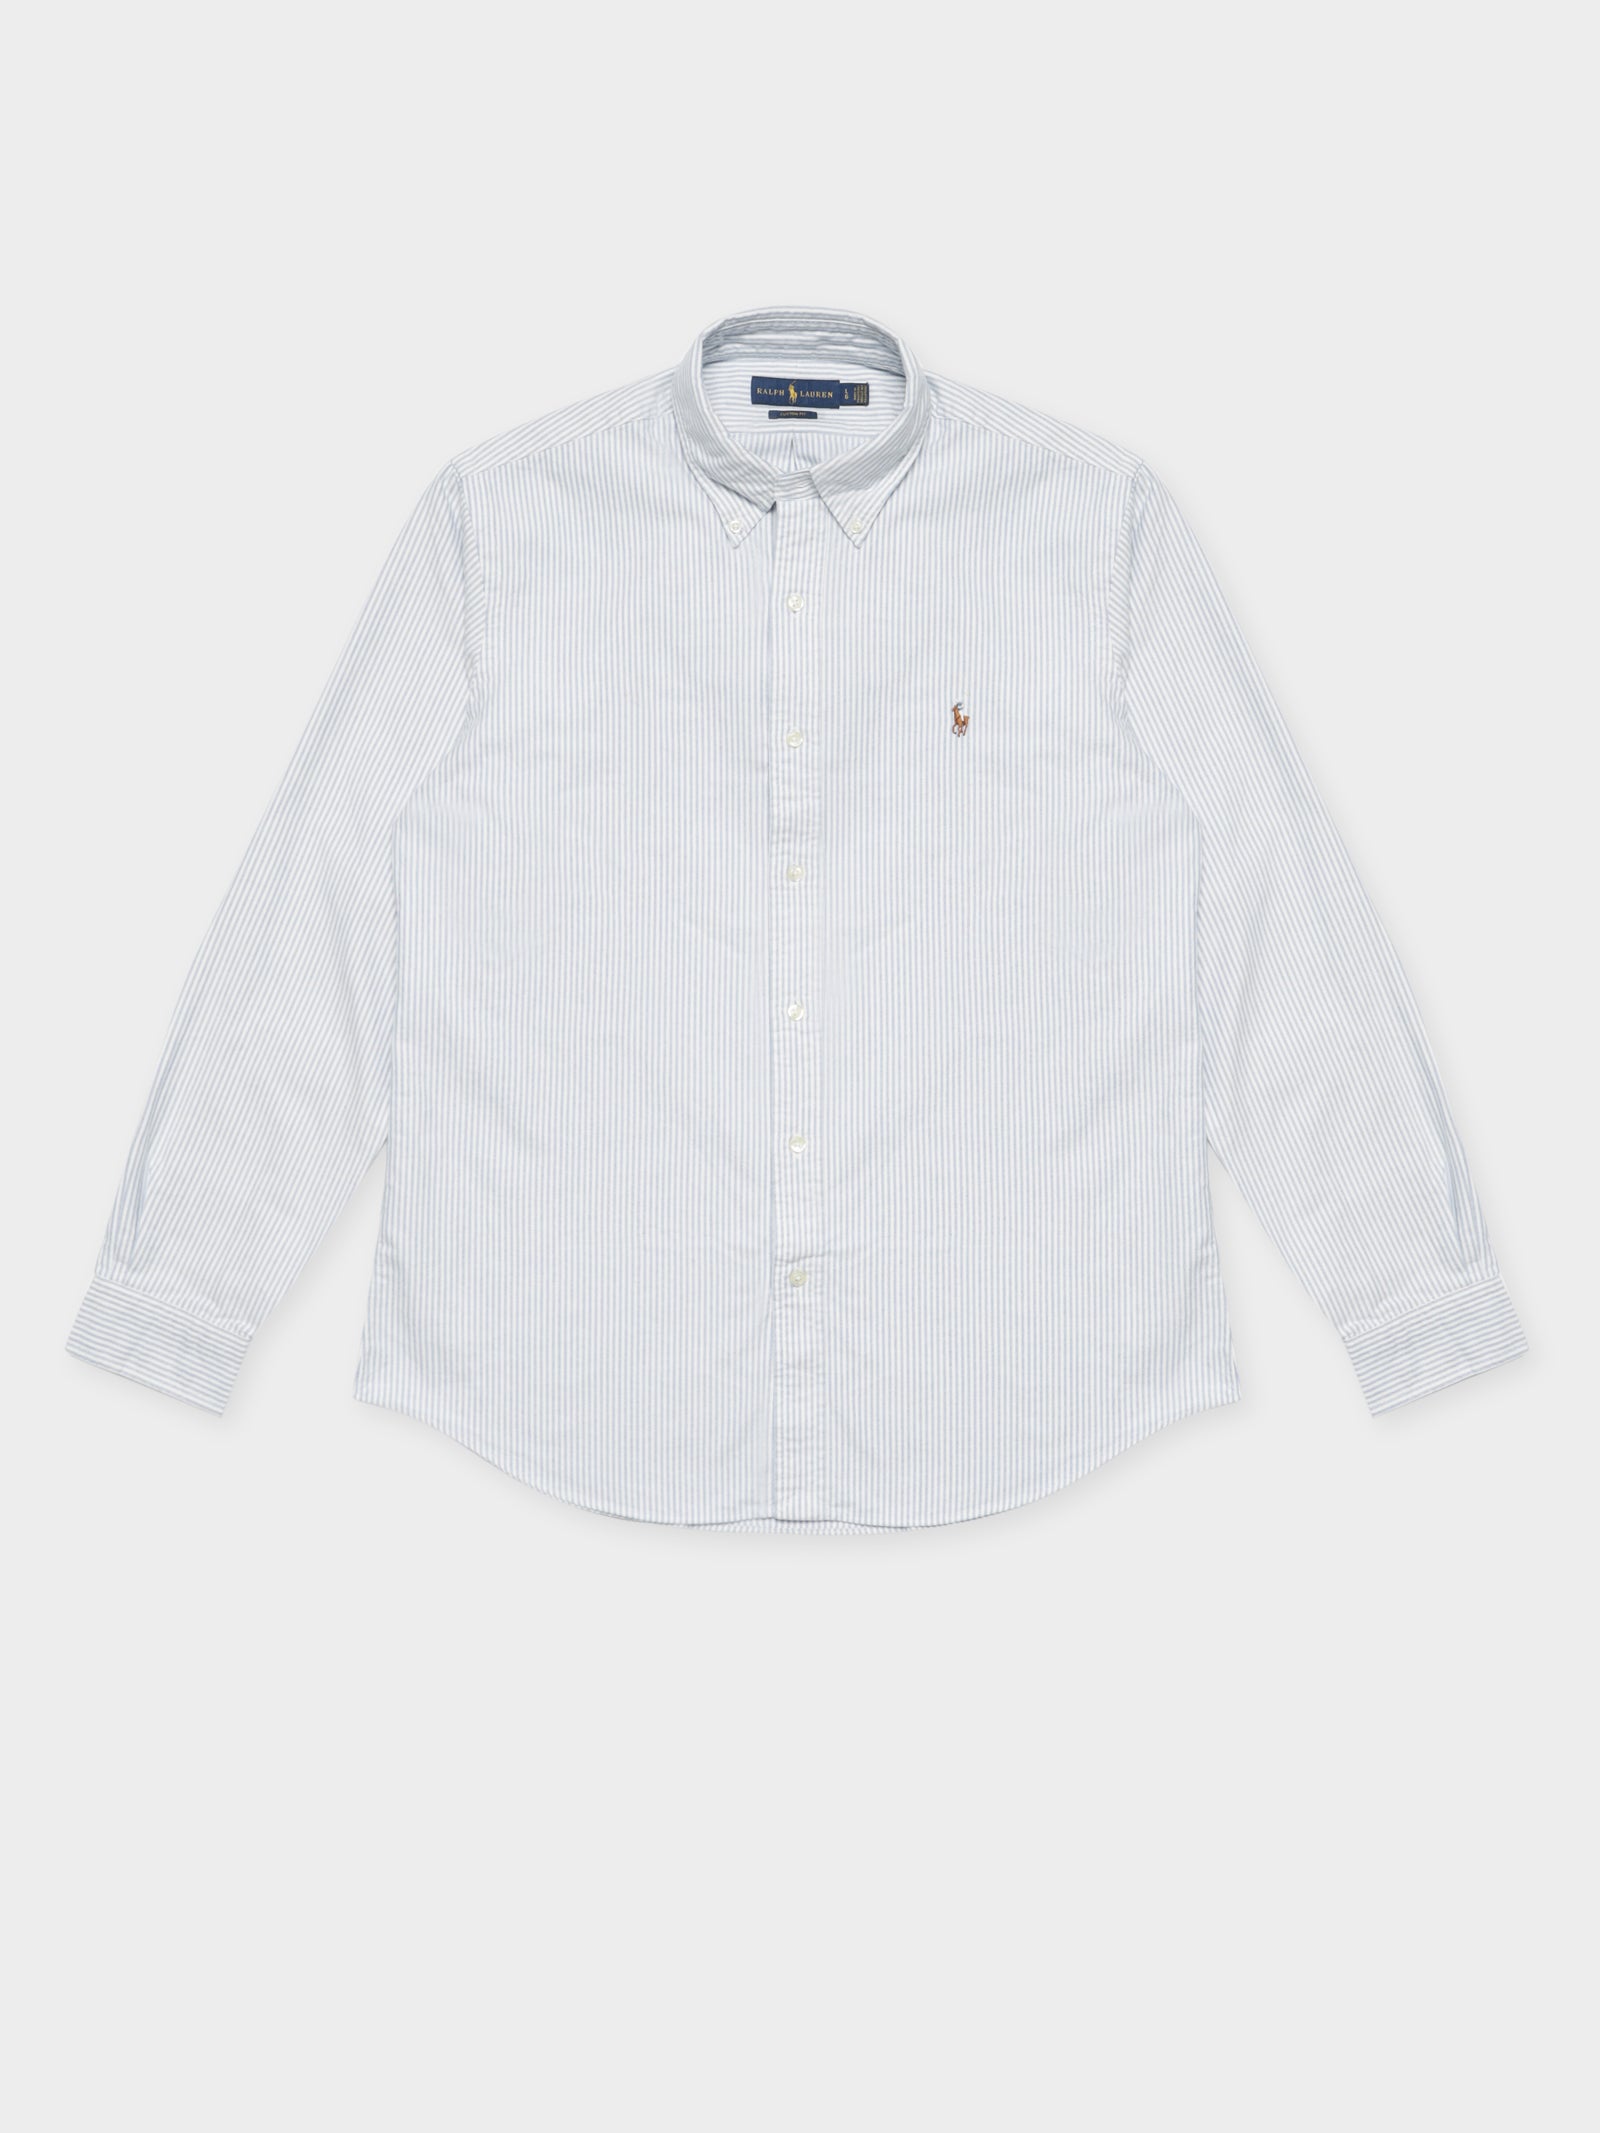 Long Sleeve Button Up Shirt in Blue & White